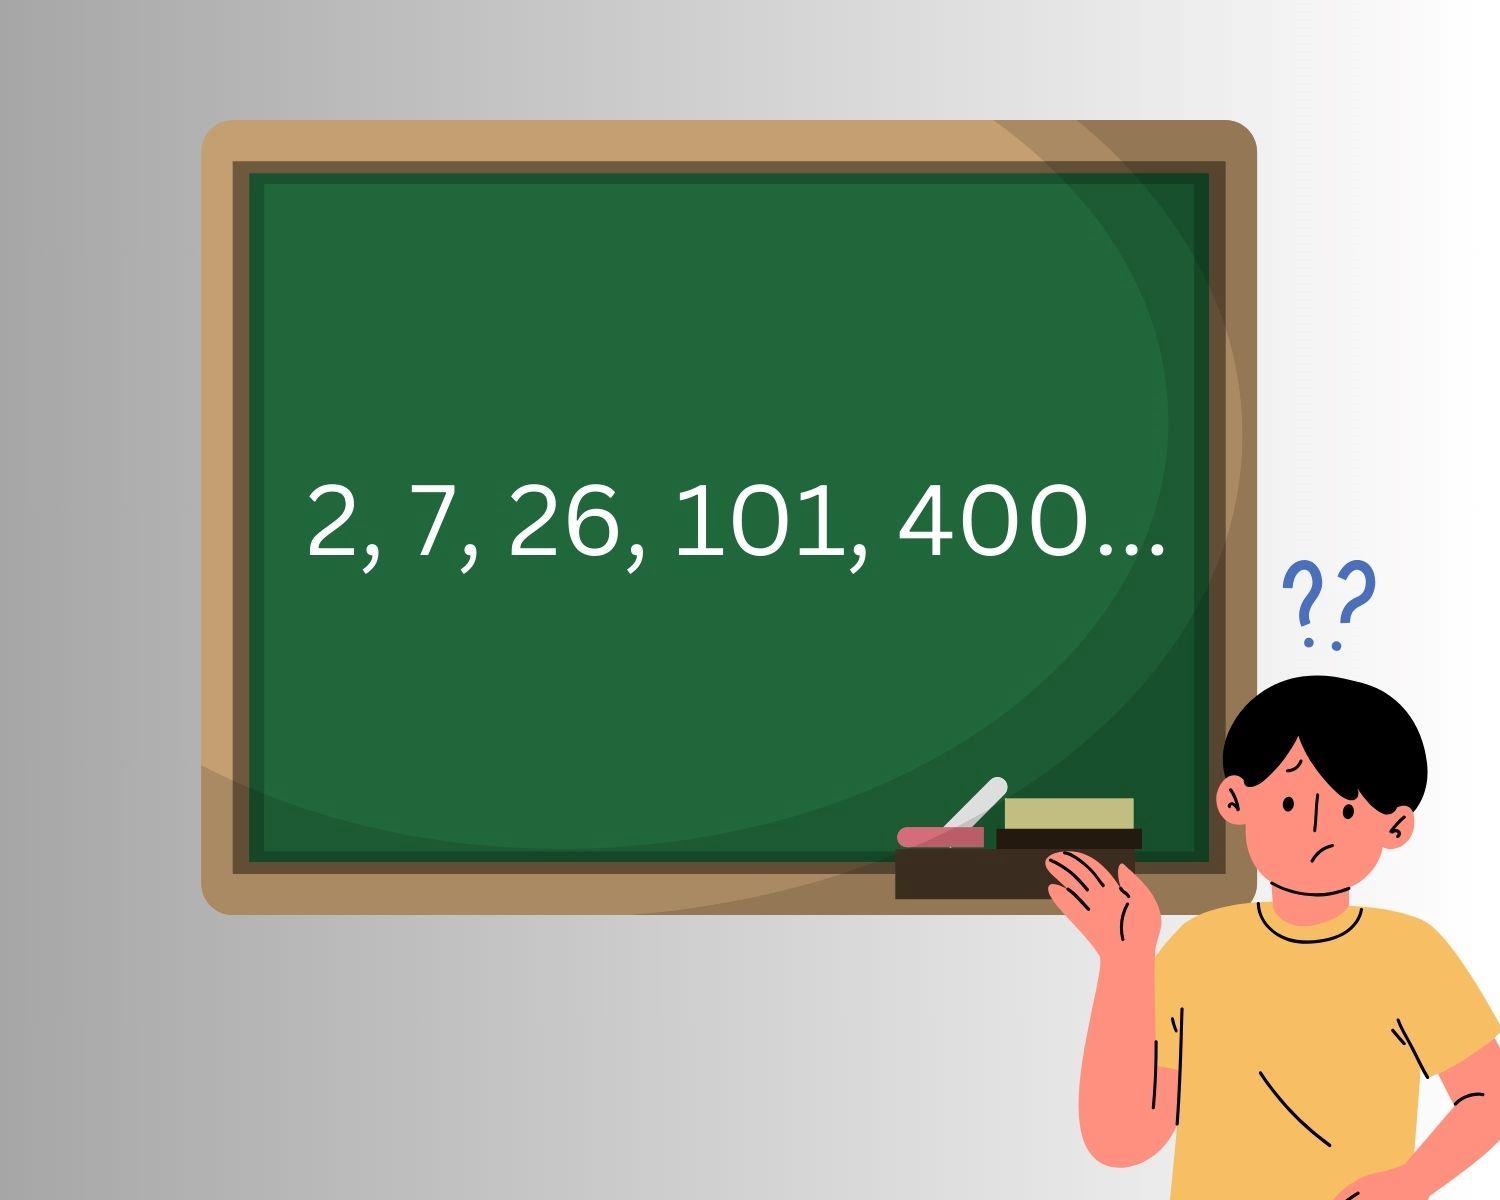 The Mind-Boggling Number Sequence You Won’t Believe: 2, 7, 26, 101, 400… What Comes Next?